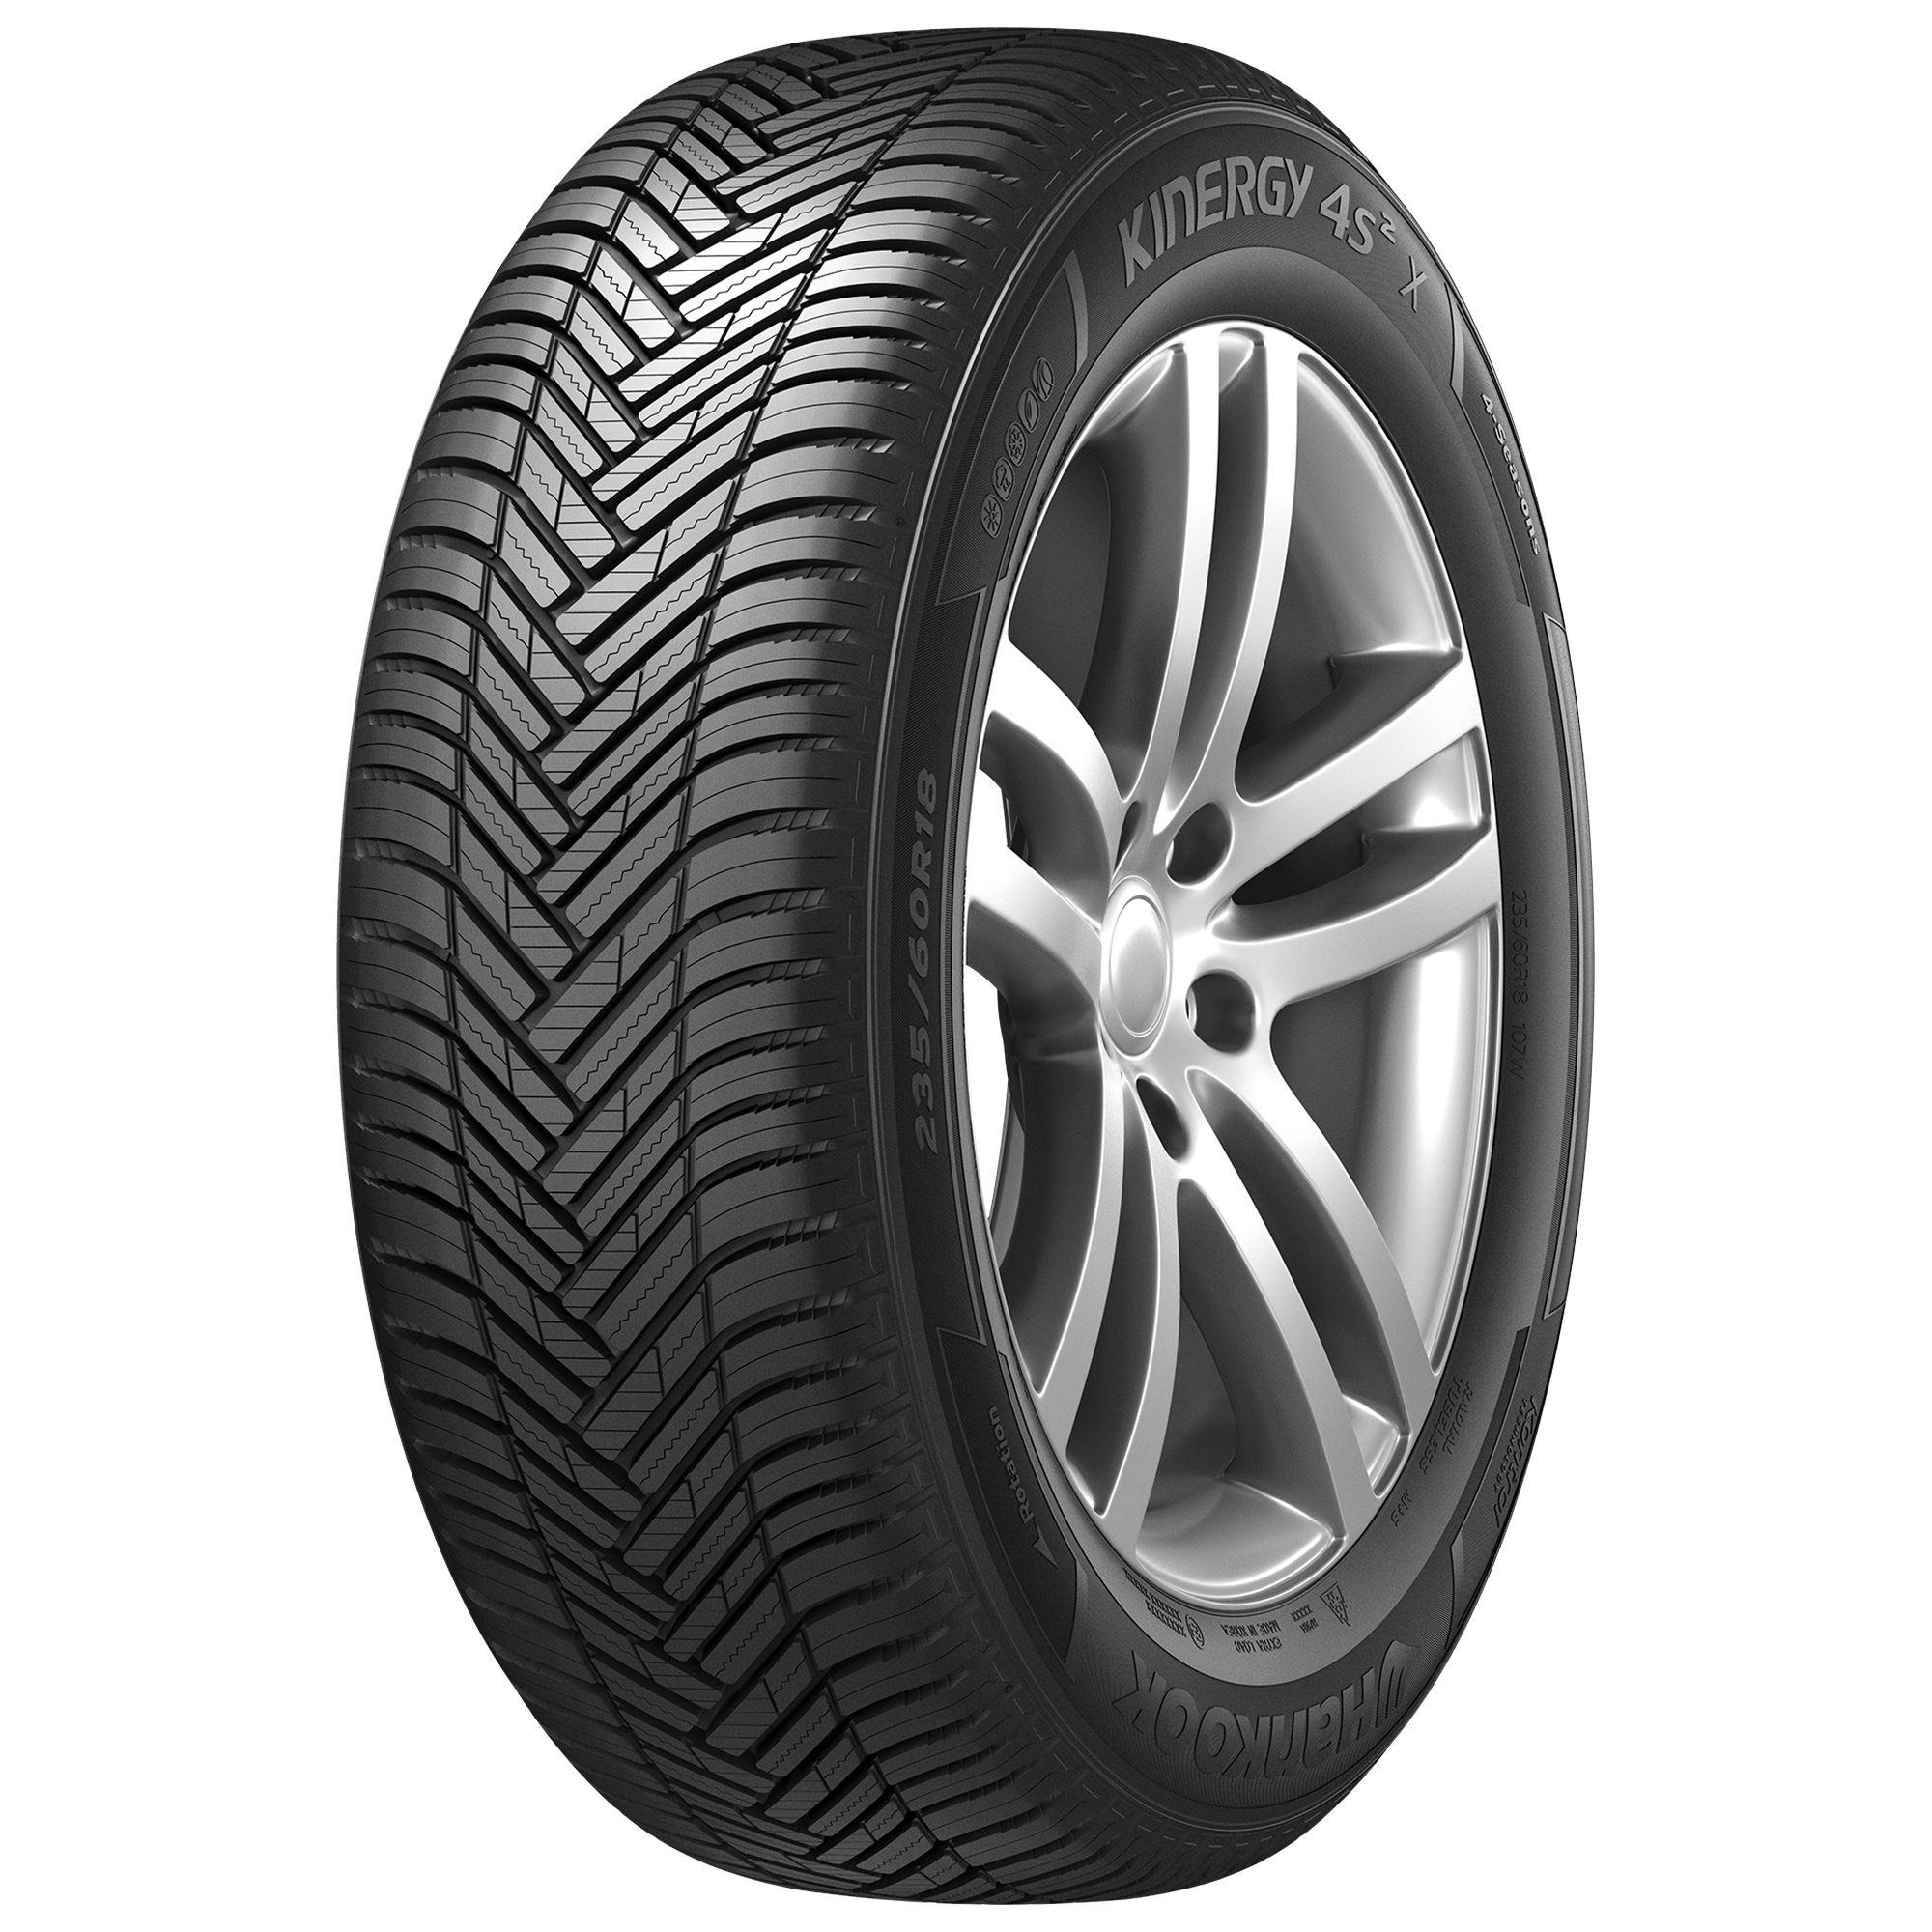 HANKOOK KINERGY 4S 2 X (H750A) 215/70R16 100H BSW